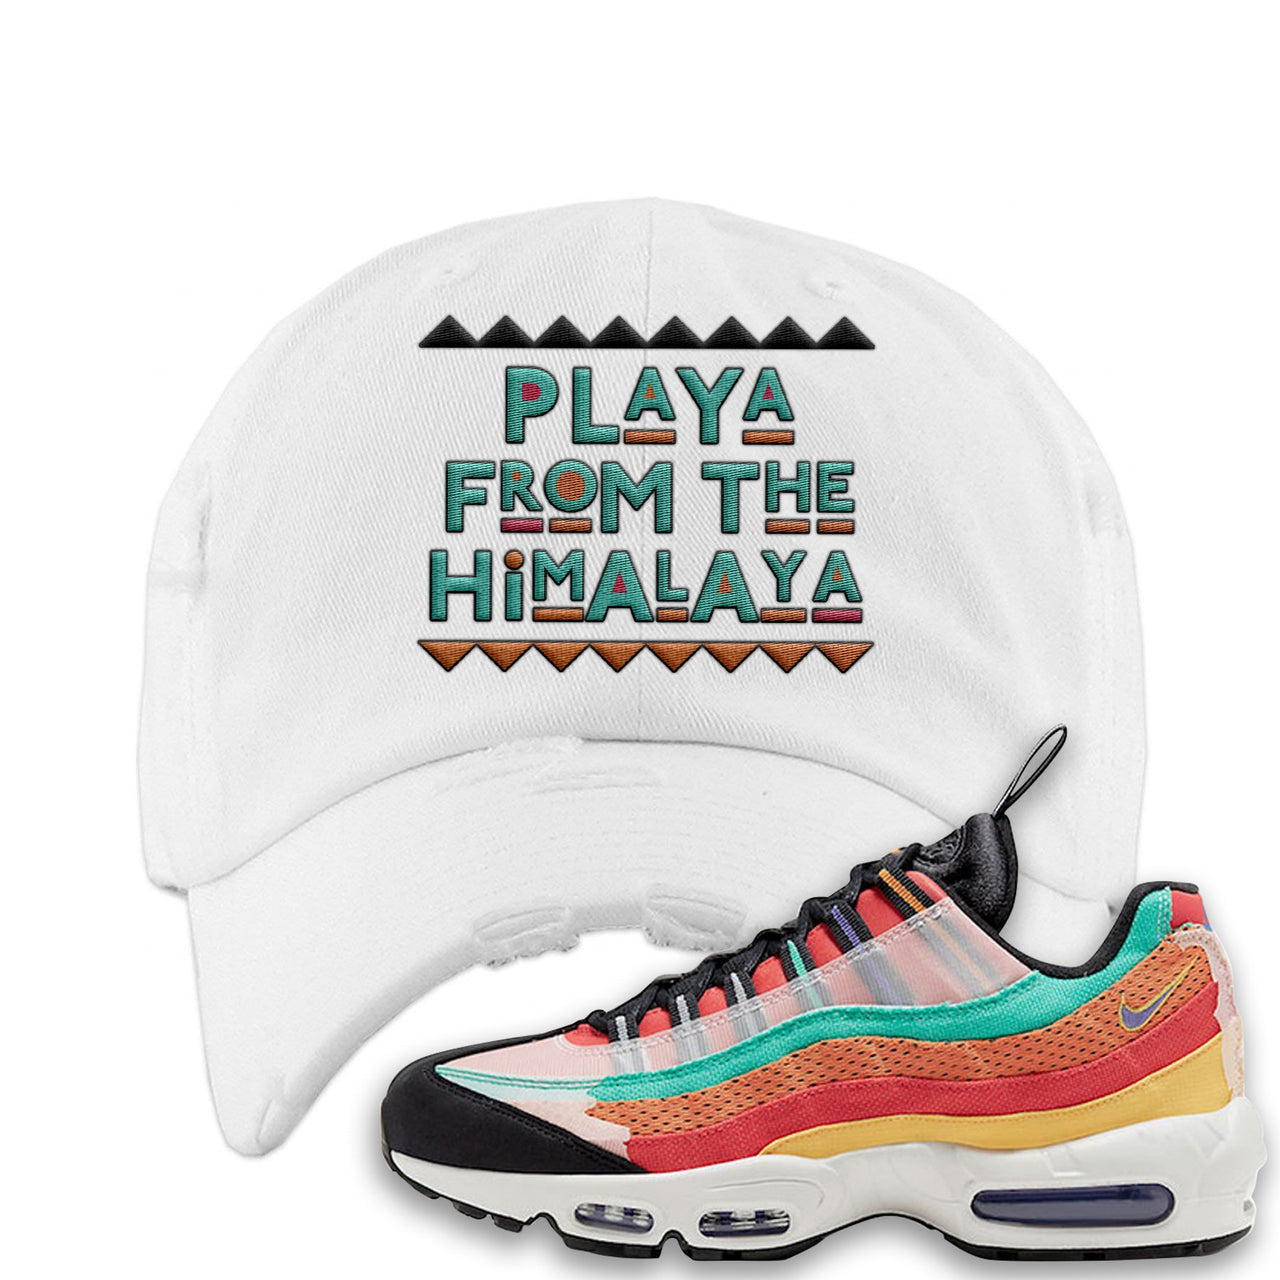 Air Max 95 Black History Month Sneaker White Distressed Dad Hat | Hat to match Air Max 95 Black History Month Shoes | Playa From The Himalaya